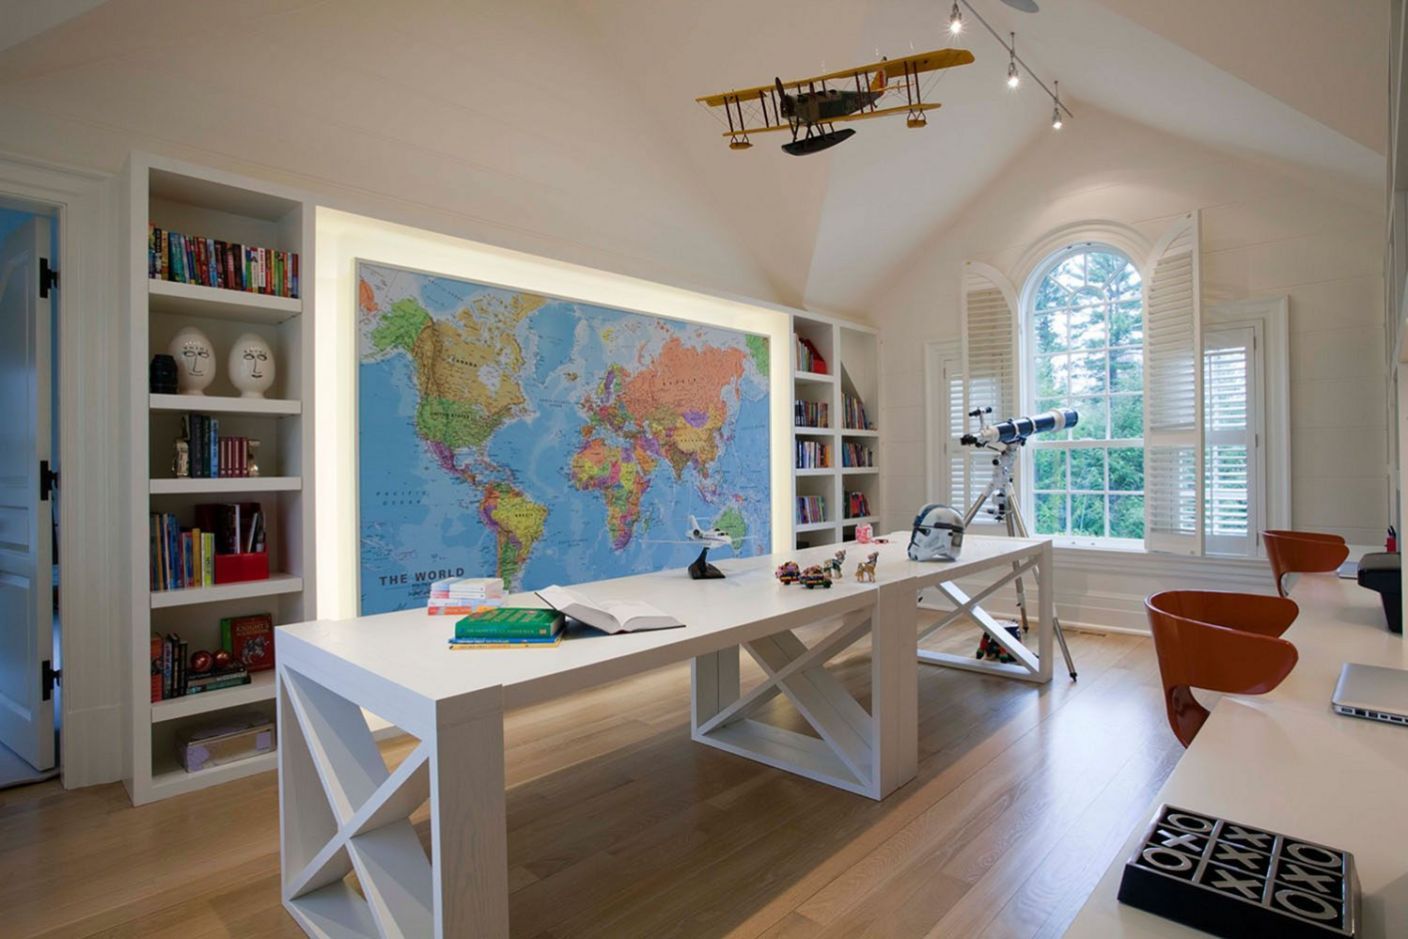 stydy space 2 10 Tips to Design the Study Space Perfectly - 20